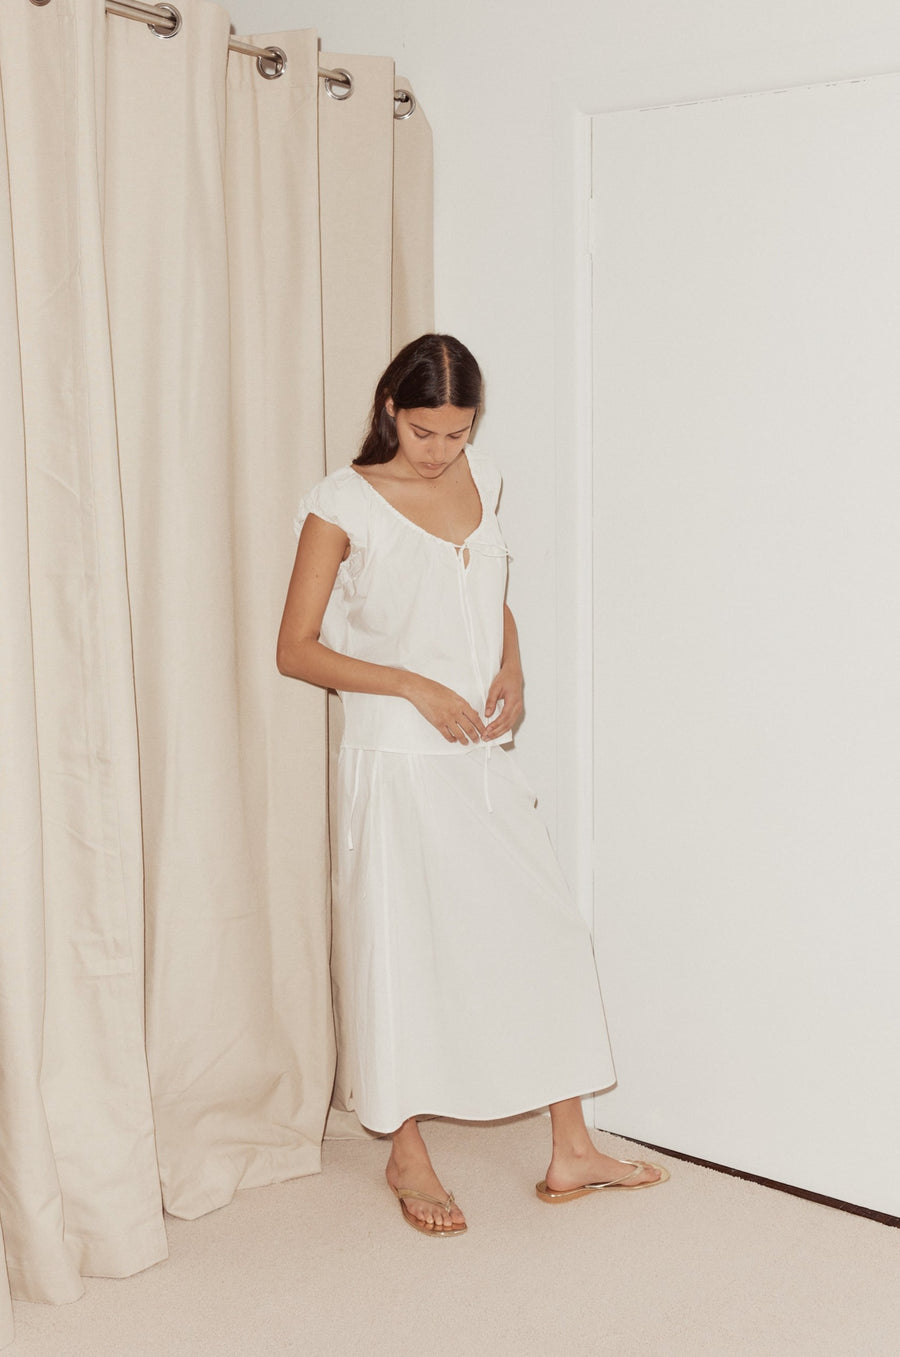 Side shot of female model wearing the Pintuck Skirt in white styled with the One Panel Top in white, standing on beige plush carpet in front of a beige curtain and white wall.